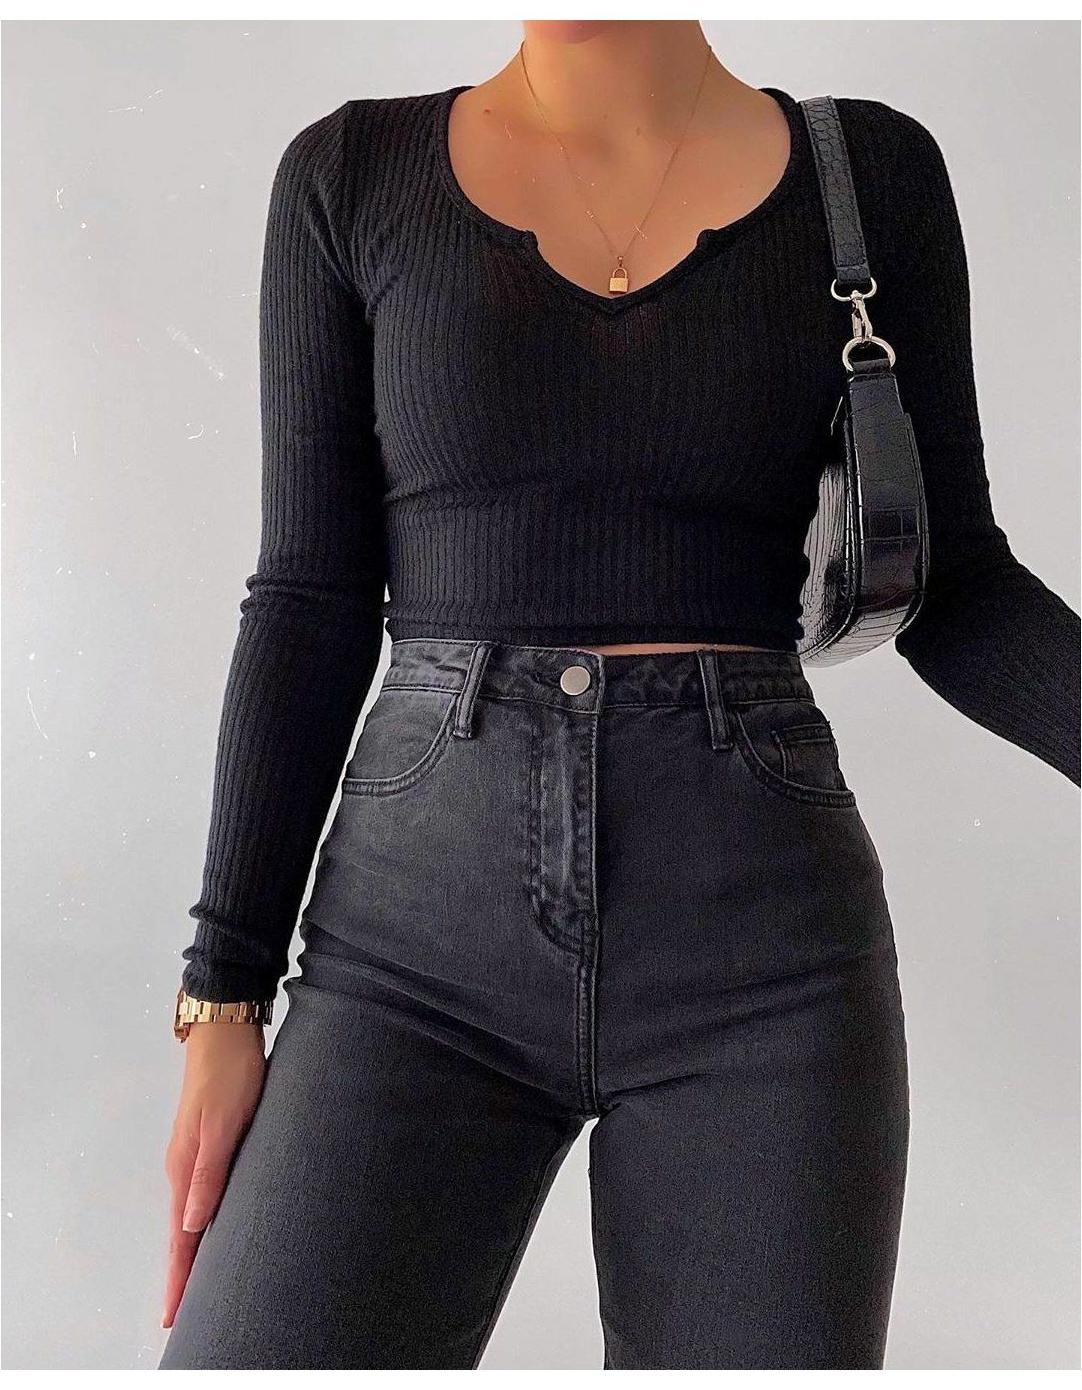 1990s Trends For Women Are Back: Easy Outfit Ideas 2023